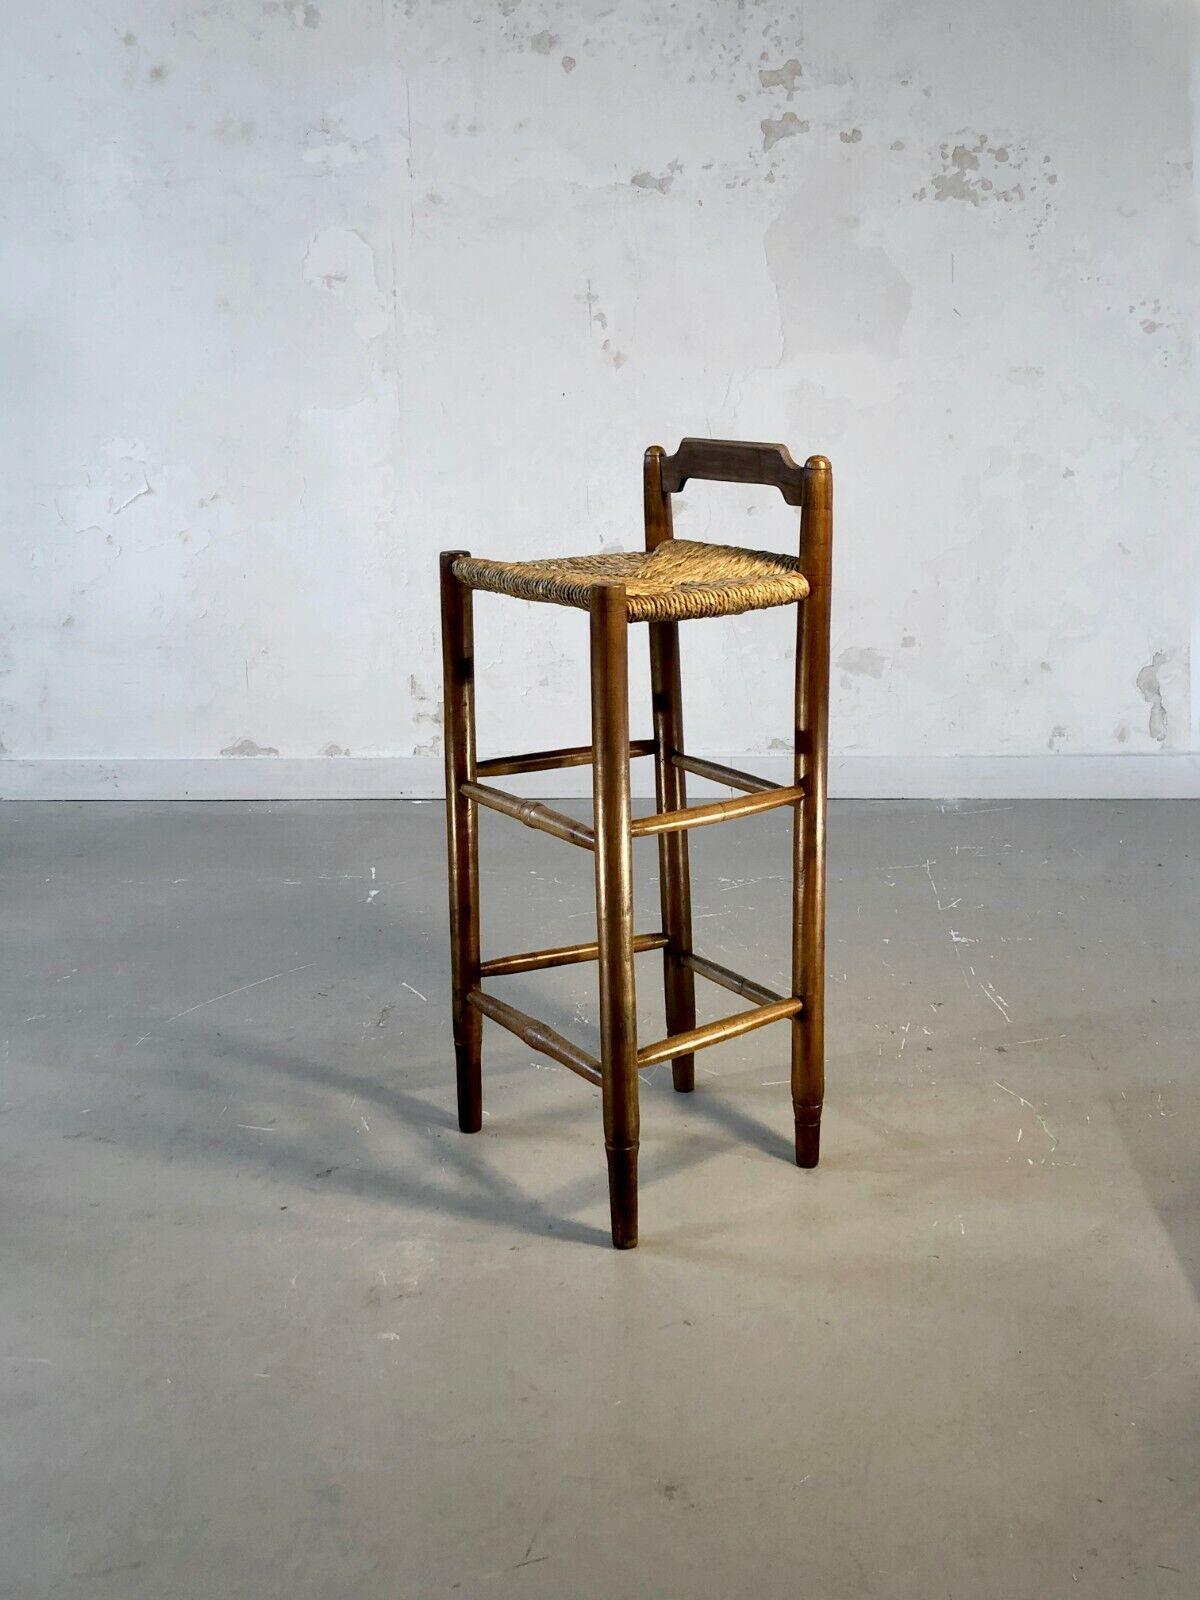 A high bar chair, Folk Art, Rustic Modern, Modernist, solid brown wood structure with 2 slightly inclined rear legs, straw seat, low back with elegant line, to be attributed, France 1950.

To be attributed, any information welcome!!!

DIMENSIONS: H